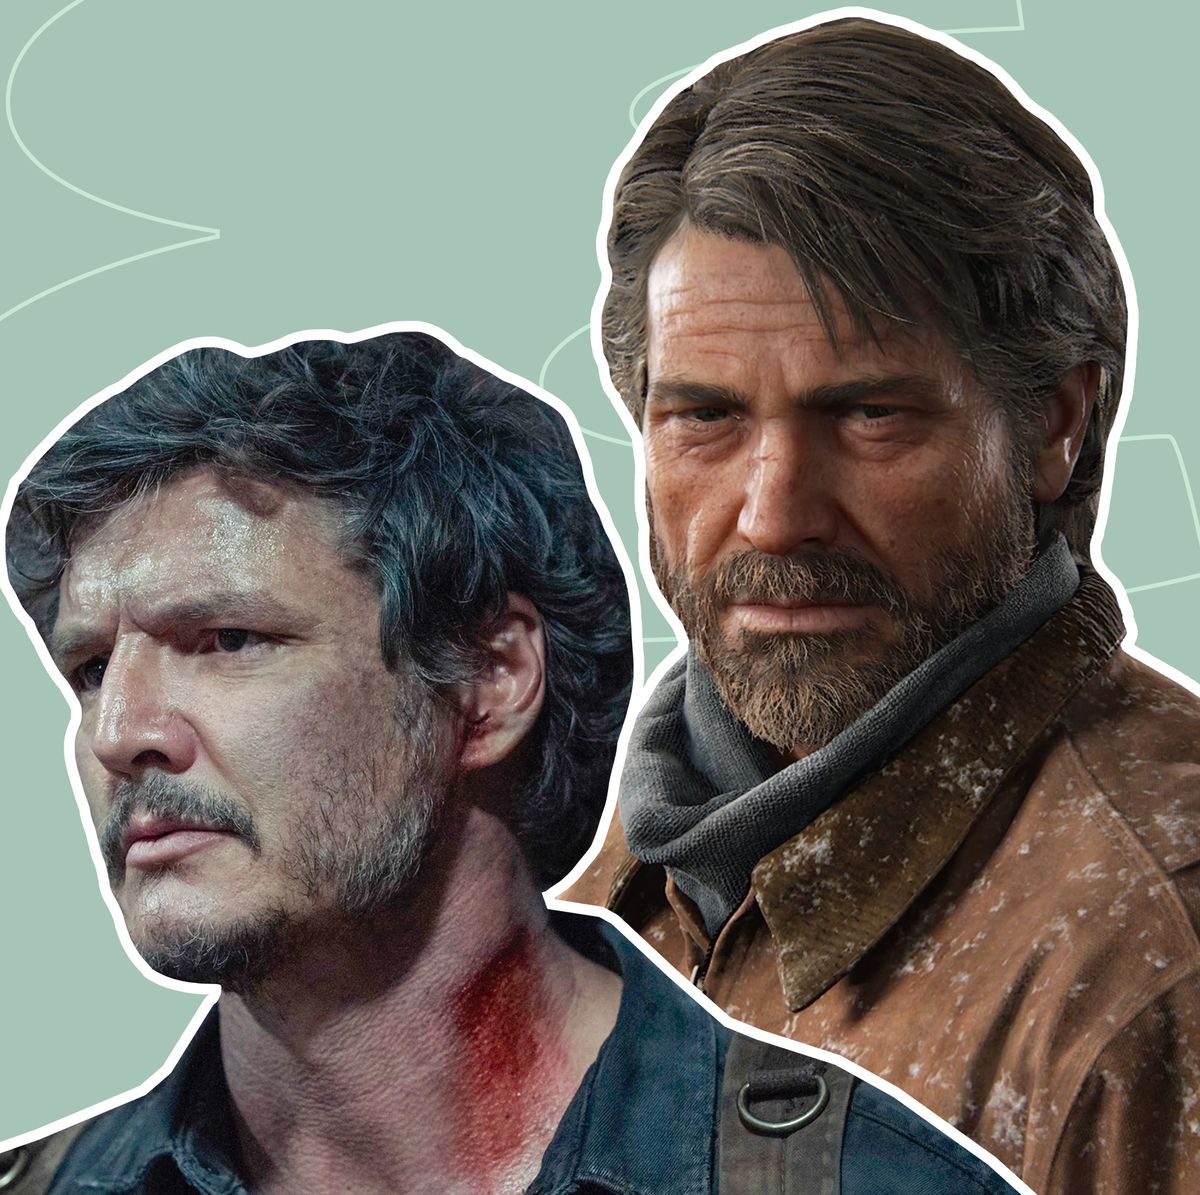 The Last of Us' Show Finale vs. Video Game: Biggest Differences